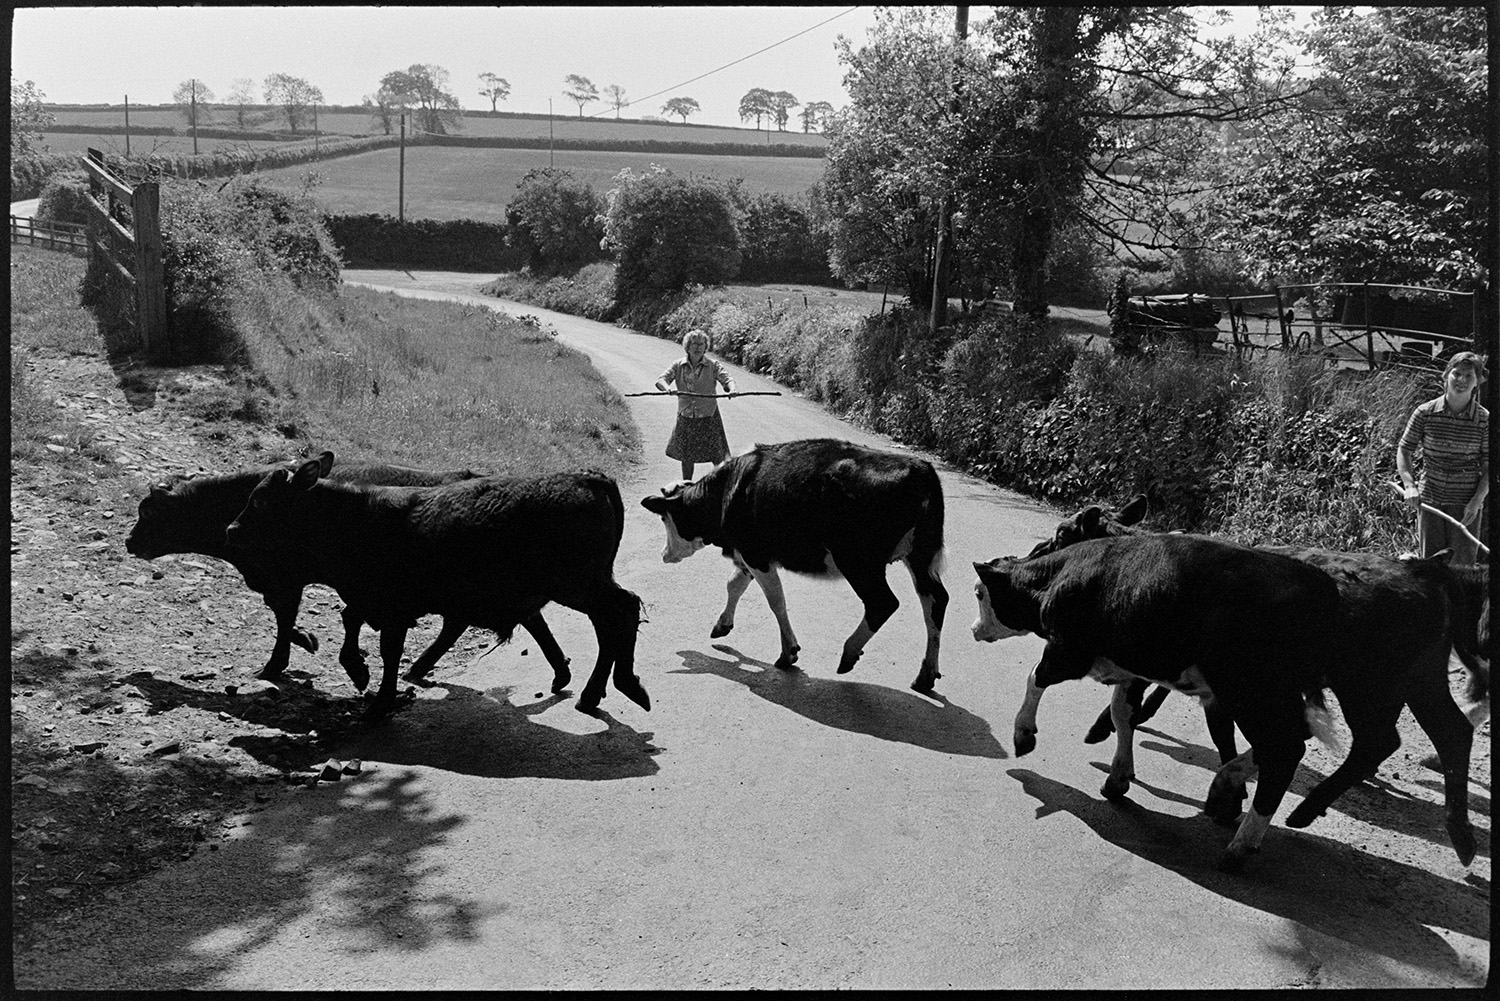 Calves being let out for the first time into orchard. 
[Calves crossing a road to go out for the first time into an orchard at Lower Langham, Dolton. May Pugsley is standing in the road holding a stick to stop the calves running down the road.]